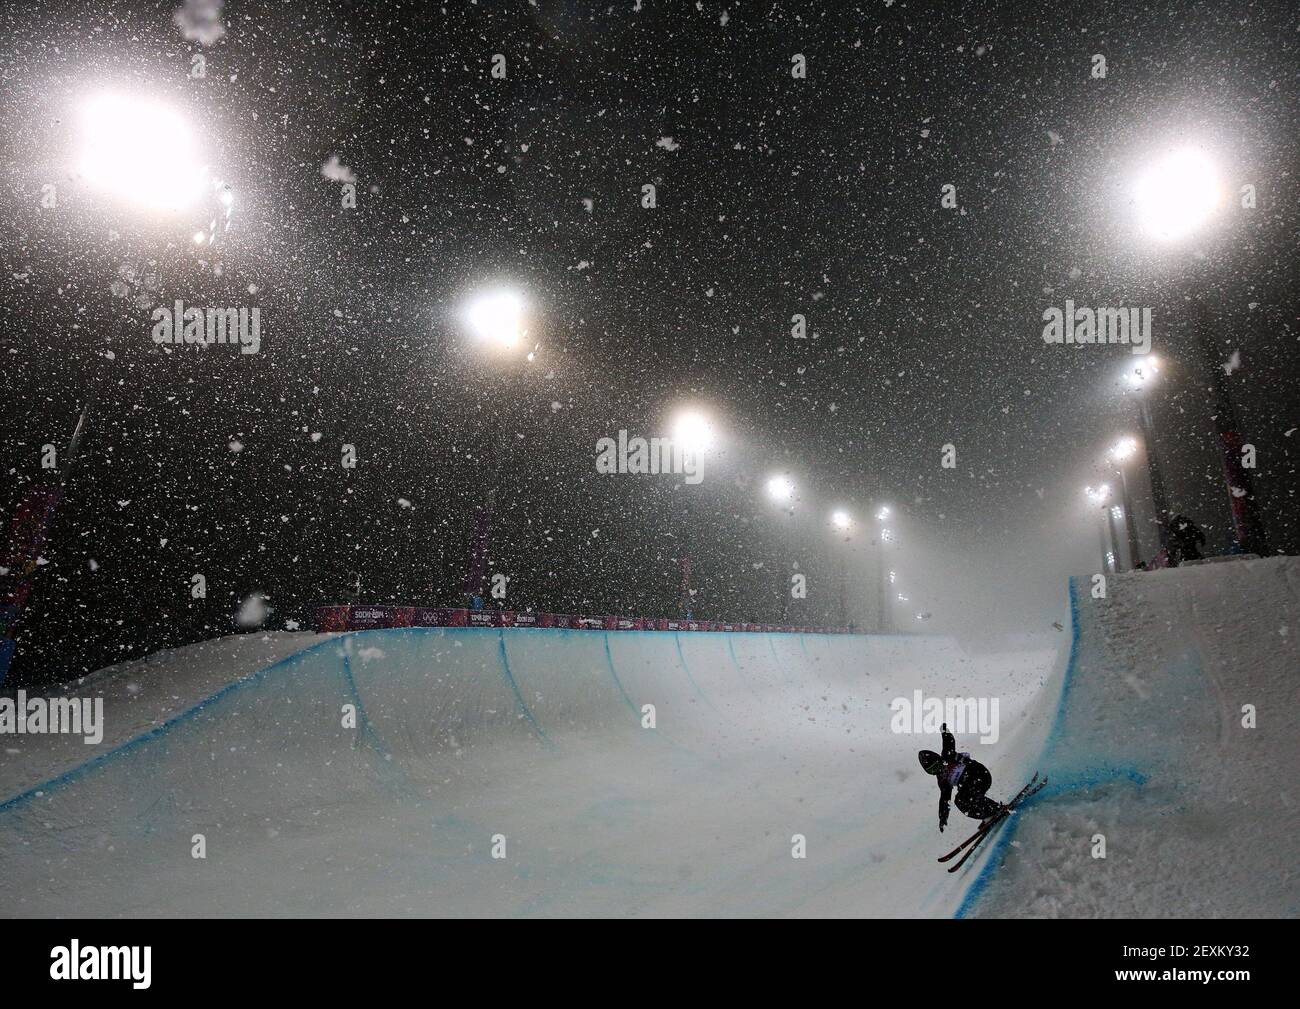 Skiers warm up in heavy snow for the finals of the men's ski halfpipe at Rosa Khutor Extreme Park during the Winter Olympics in Sochi, Russia, Tuesday, Feb. 18, 2014. (Photo by Brian Cassella/Chicago Tribune/MCT/Sipa USA) Stock Photo